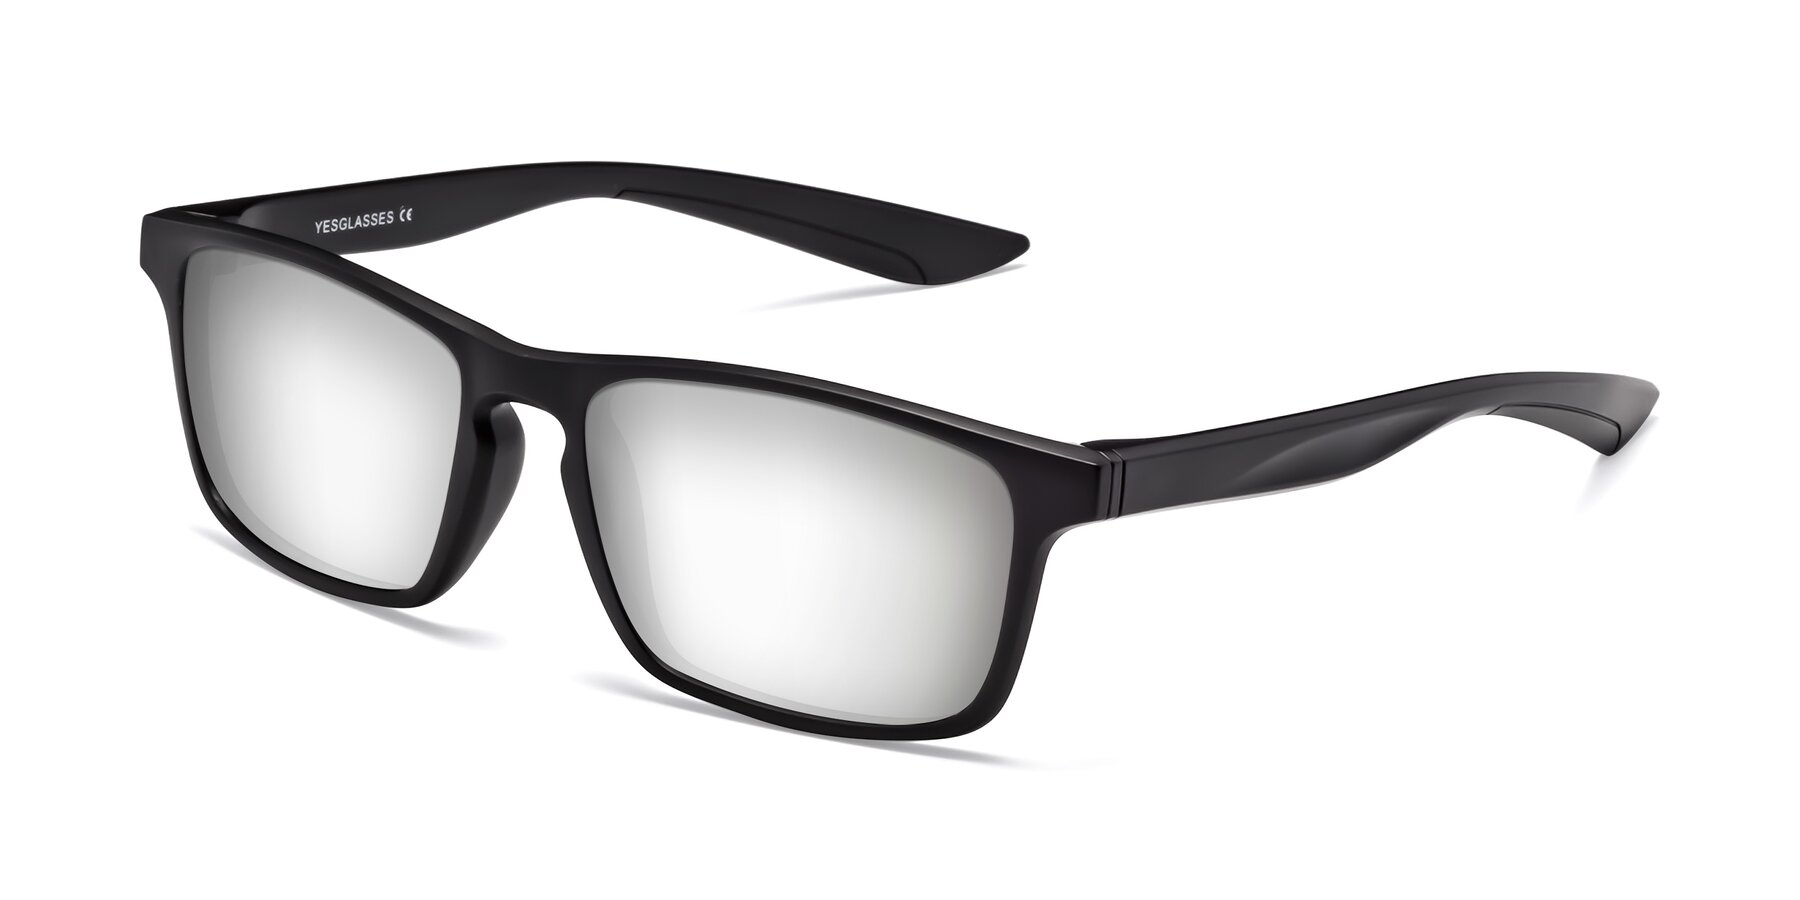 Angle of Passion in Matte Black with Silver Mirrored Lenses